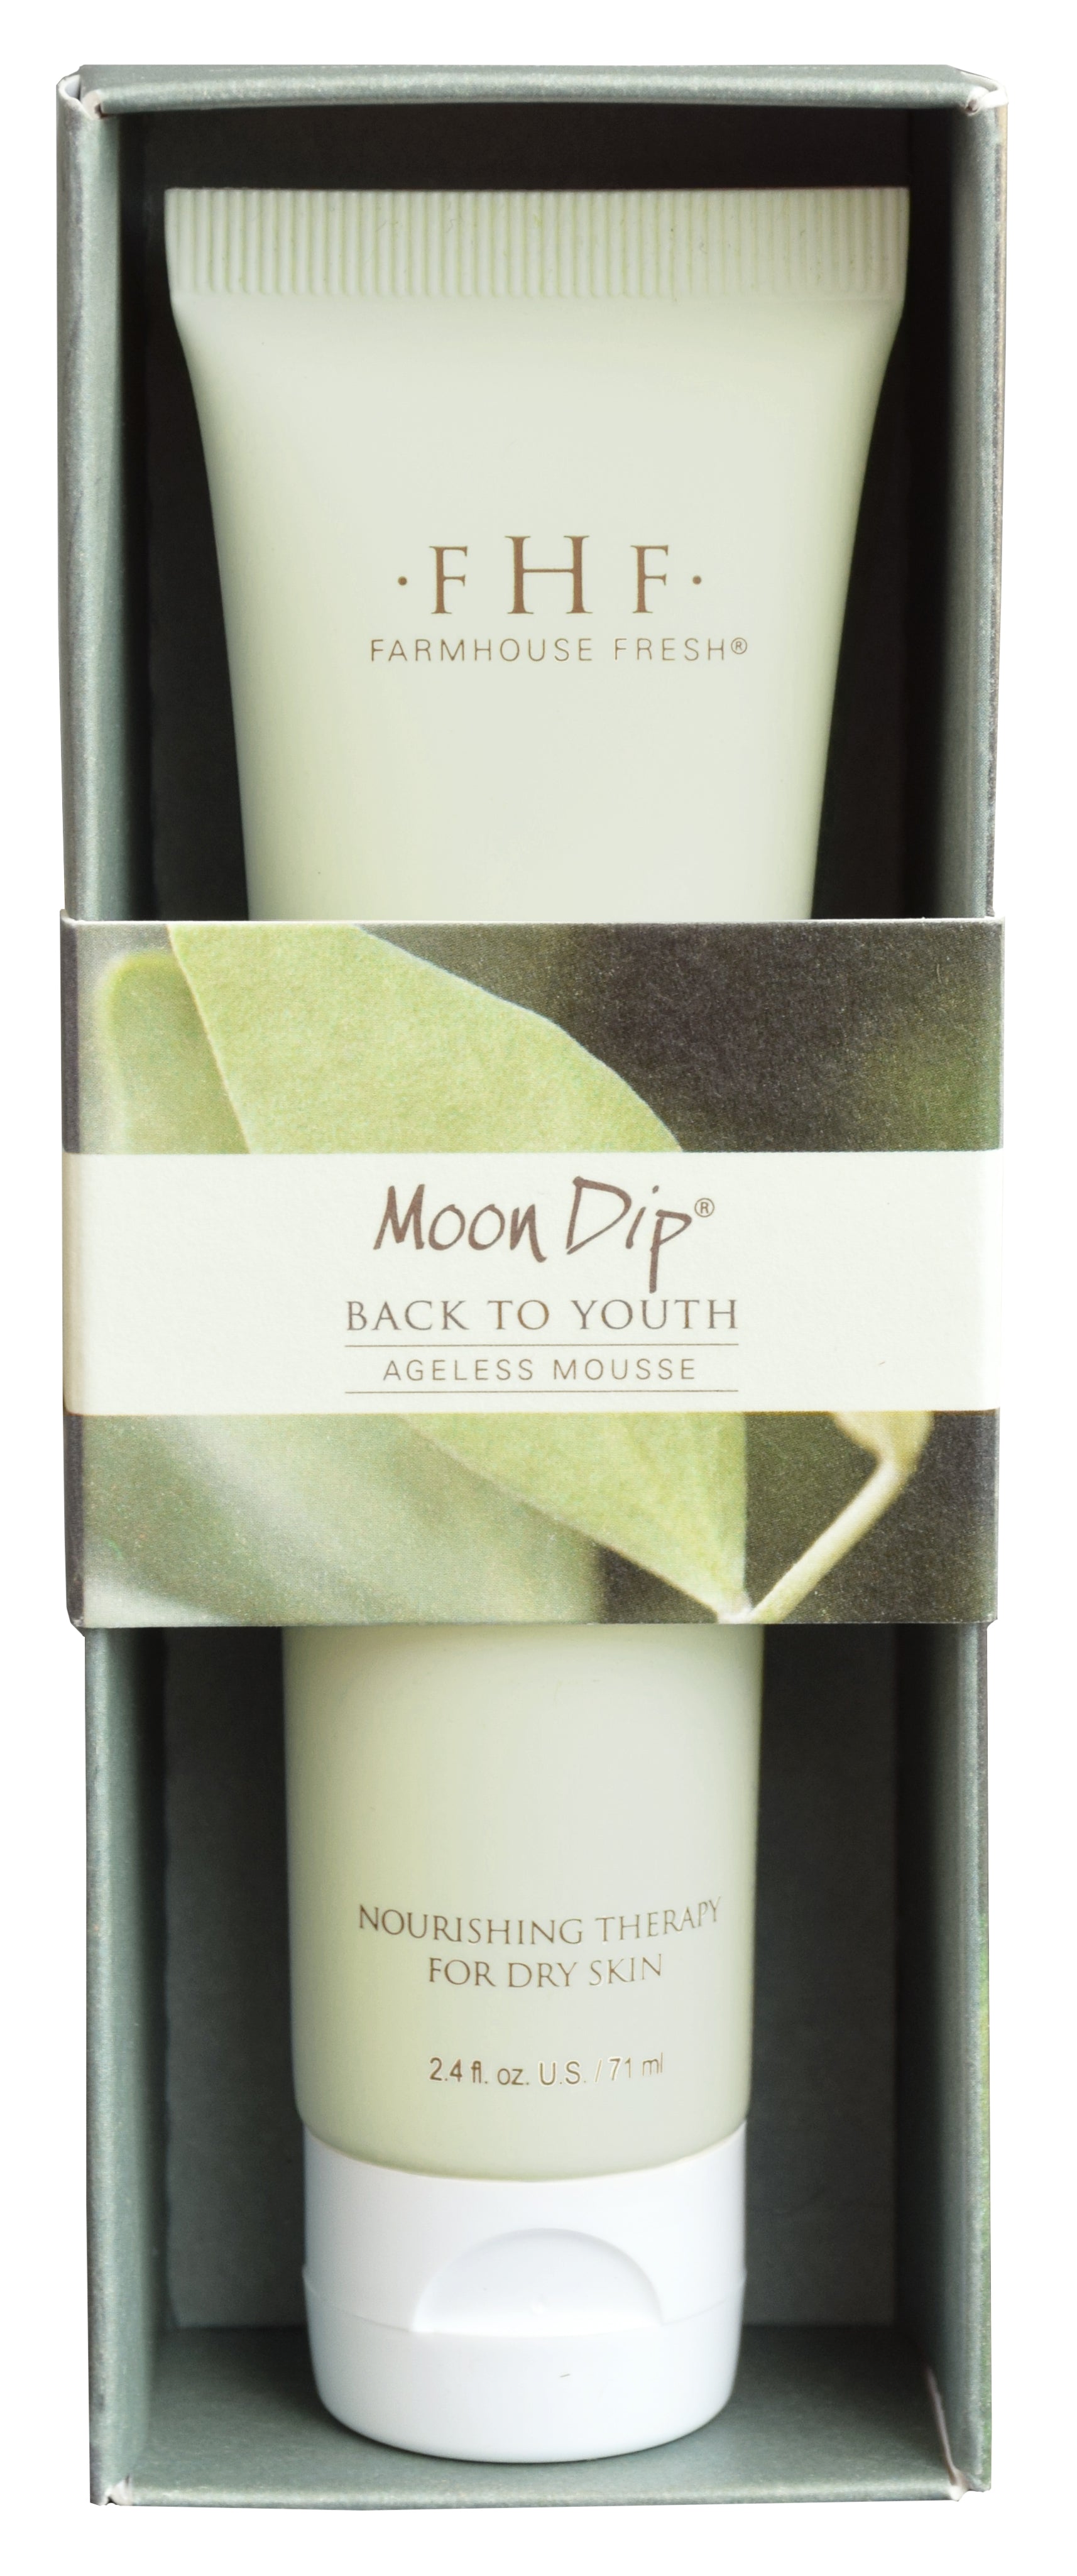 Farmhouse Fresh Moon Dip® Back To Youth Ageless Mousse for Hands